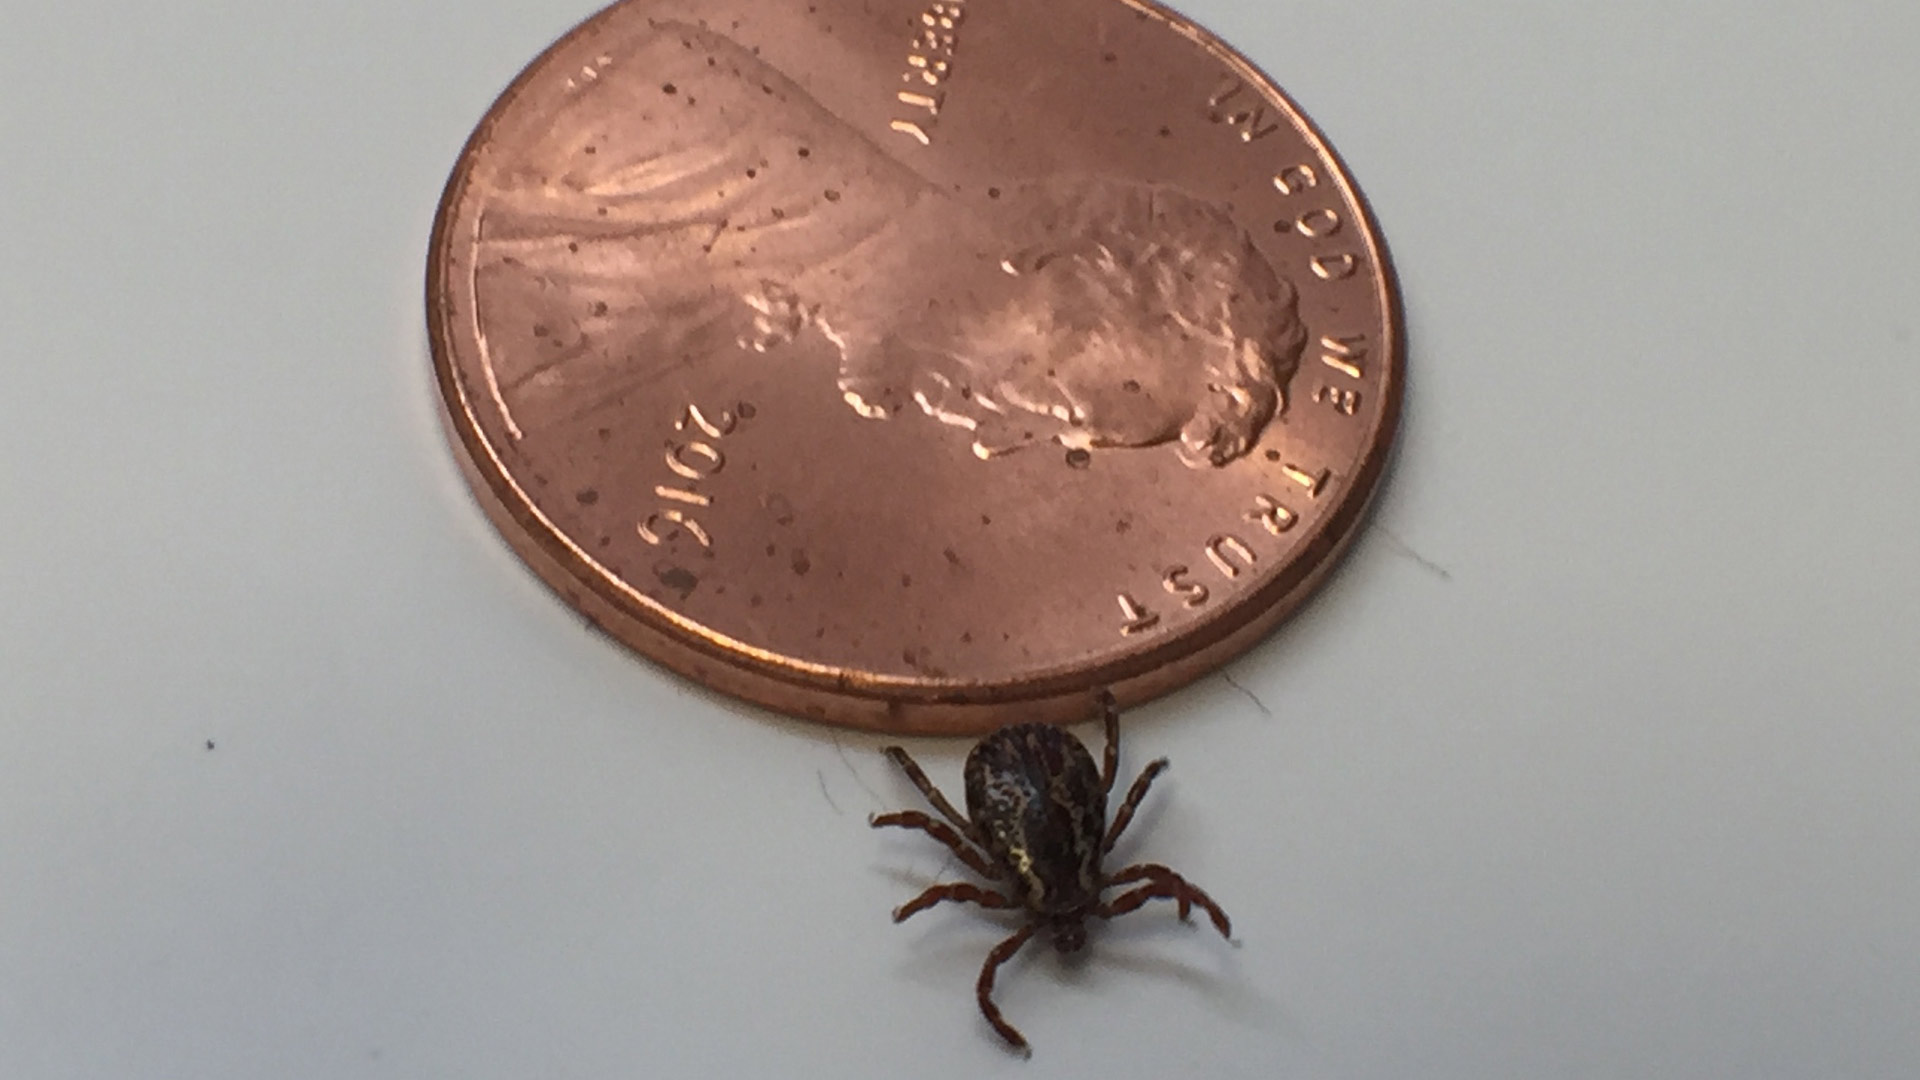 Brown dog ticks are carriers of Rocky Mountain spotted fever.